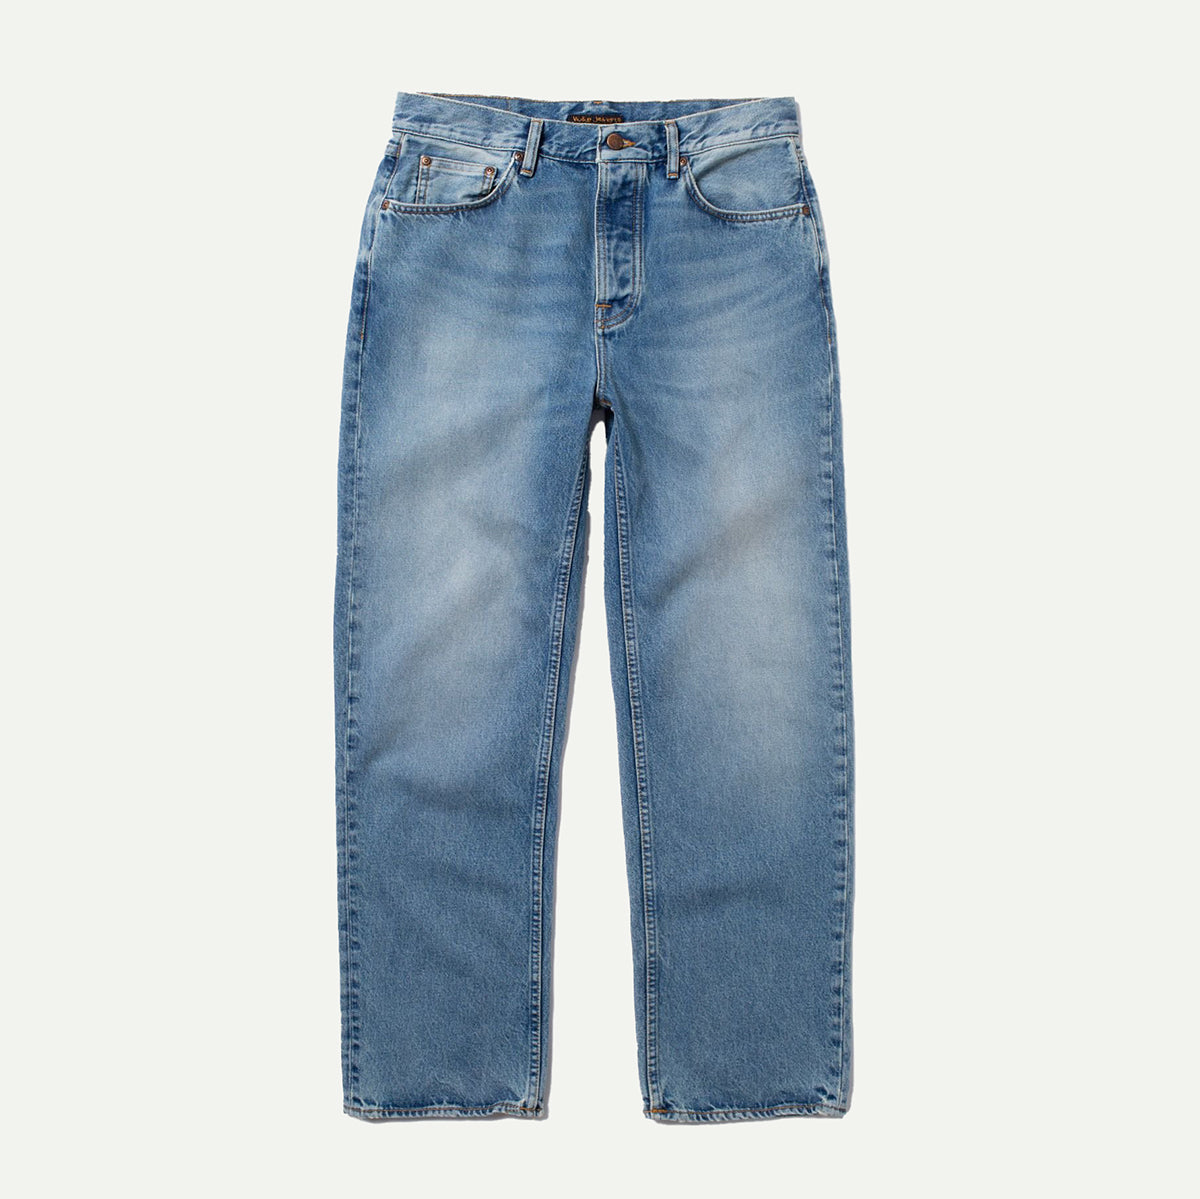 Nudie Tuff Tony Signs Of Life Jeans